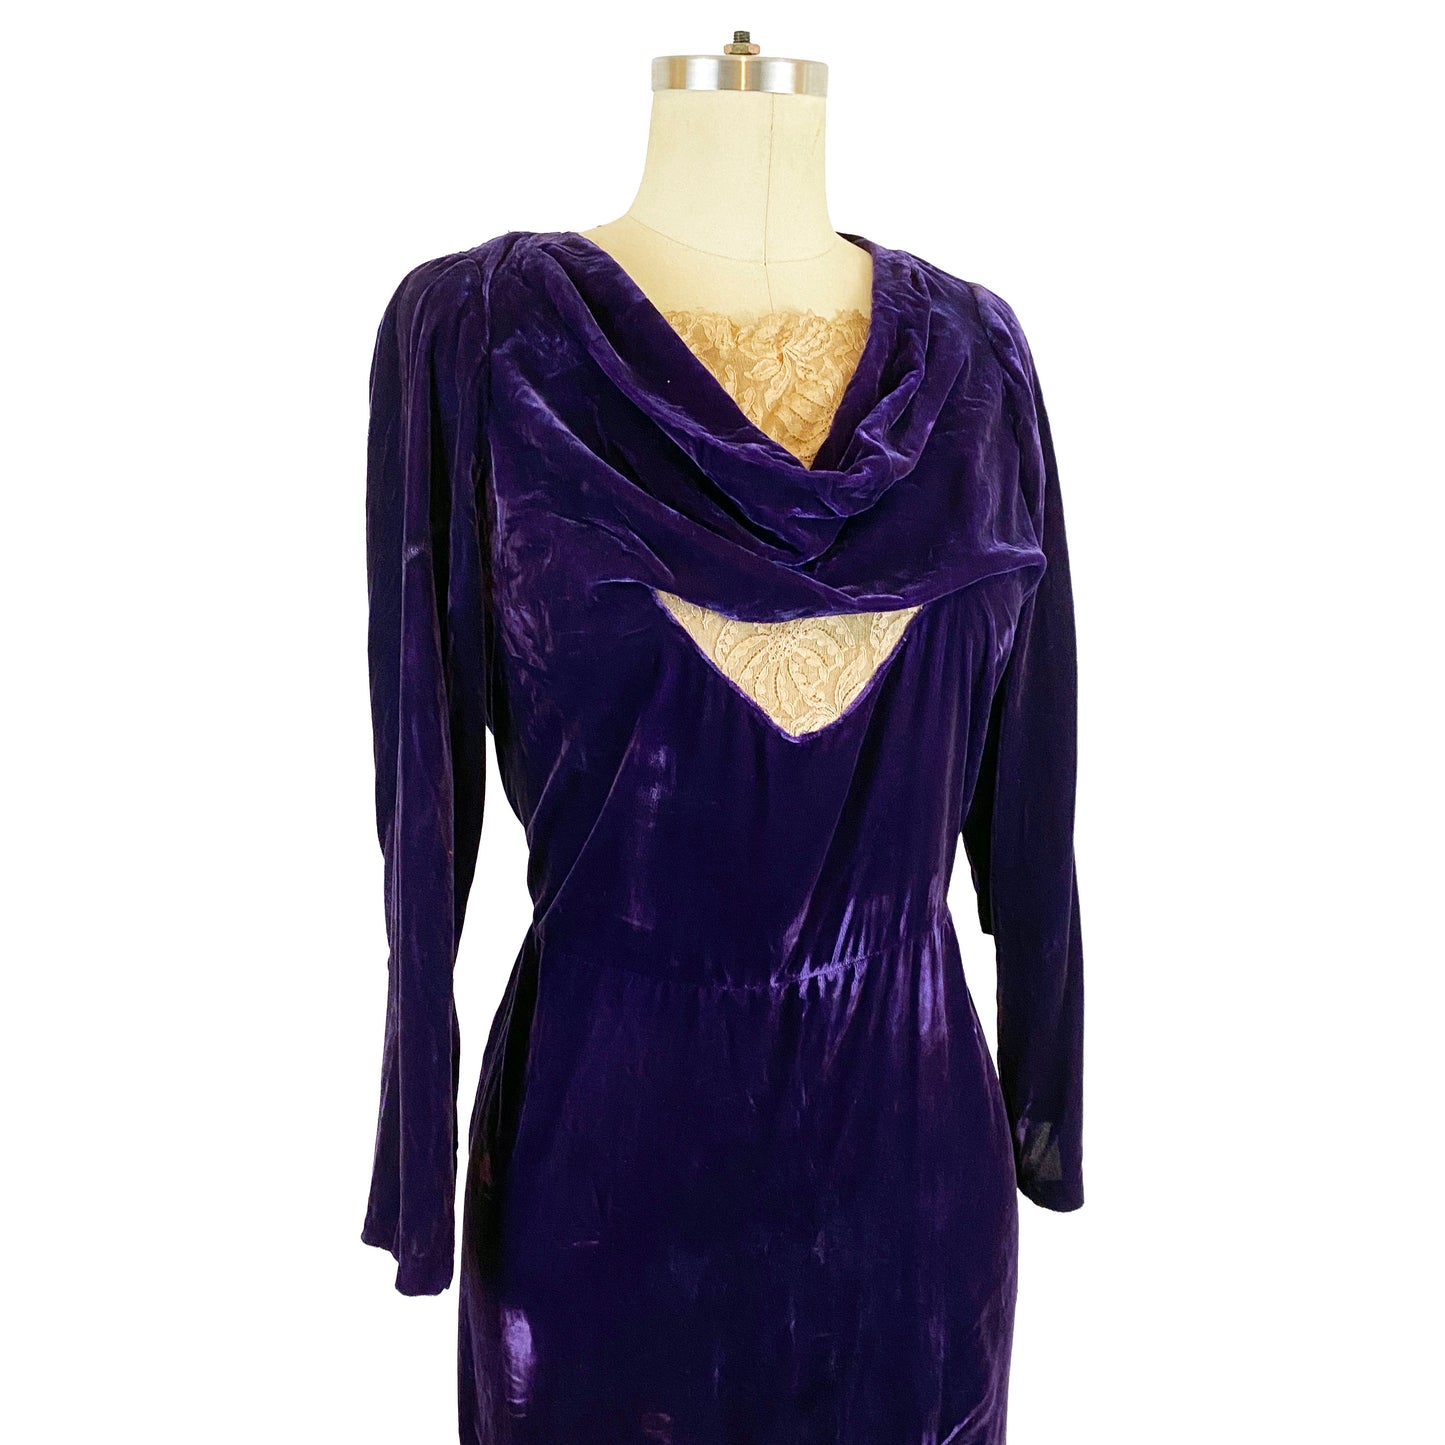 1930s Royal Purple Silk Velvet A-line Dress With Gathered and Lace Collar 30s Evening Gown / Medium